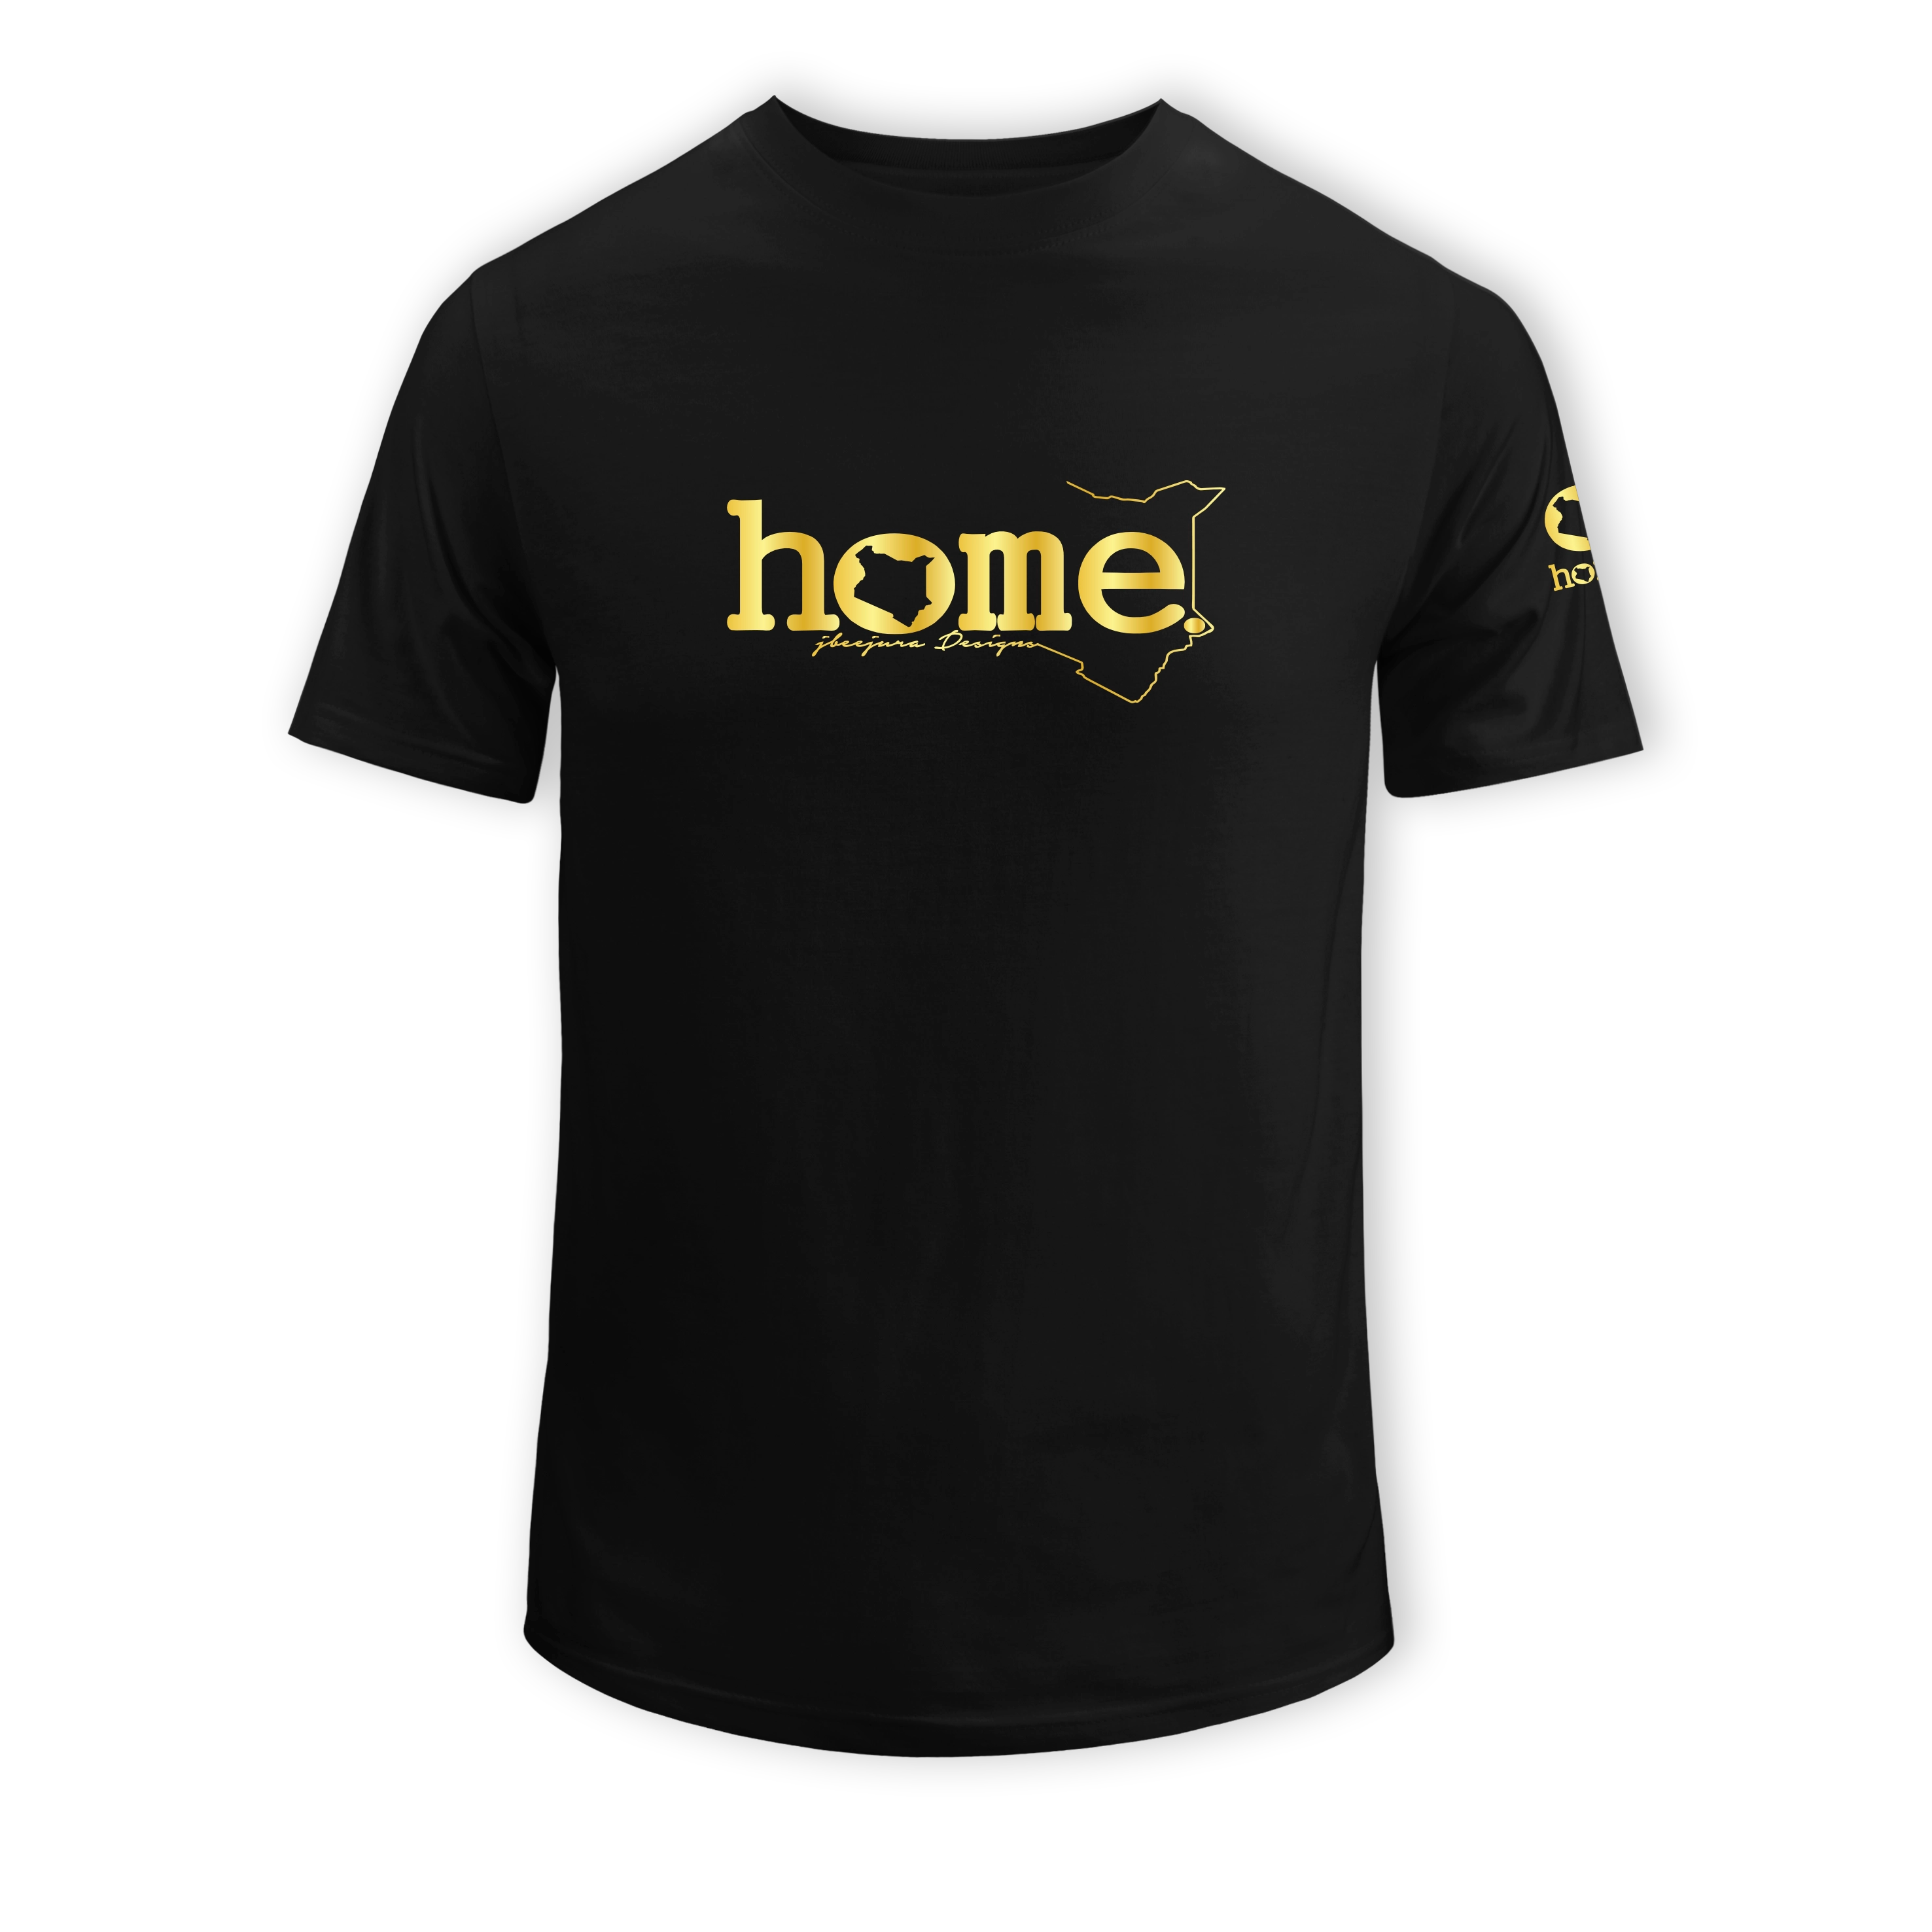 home_254 KIDS SHORT-SLEEVED BLACK T-SHIRT WITH A GOLD CLASSIC WORDS PRINT – COTTON PLUS FABRIC